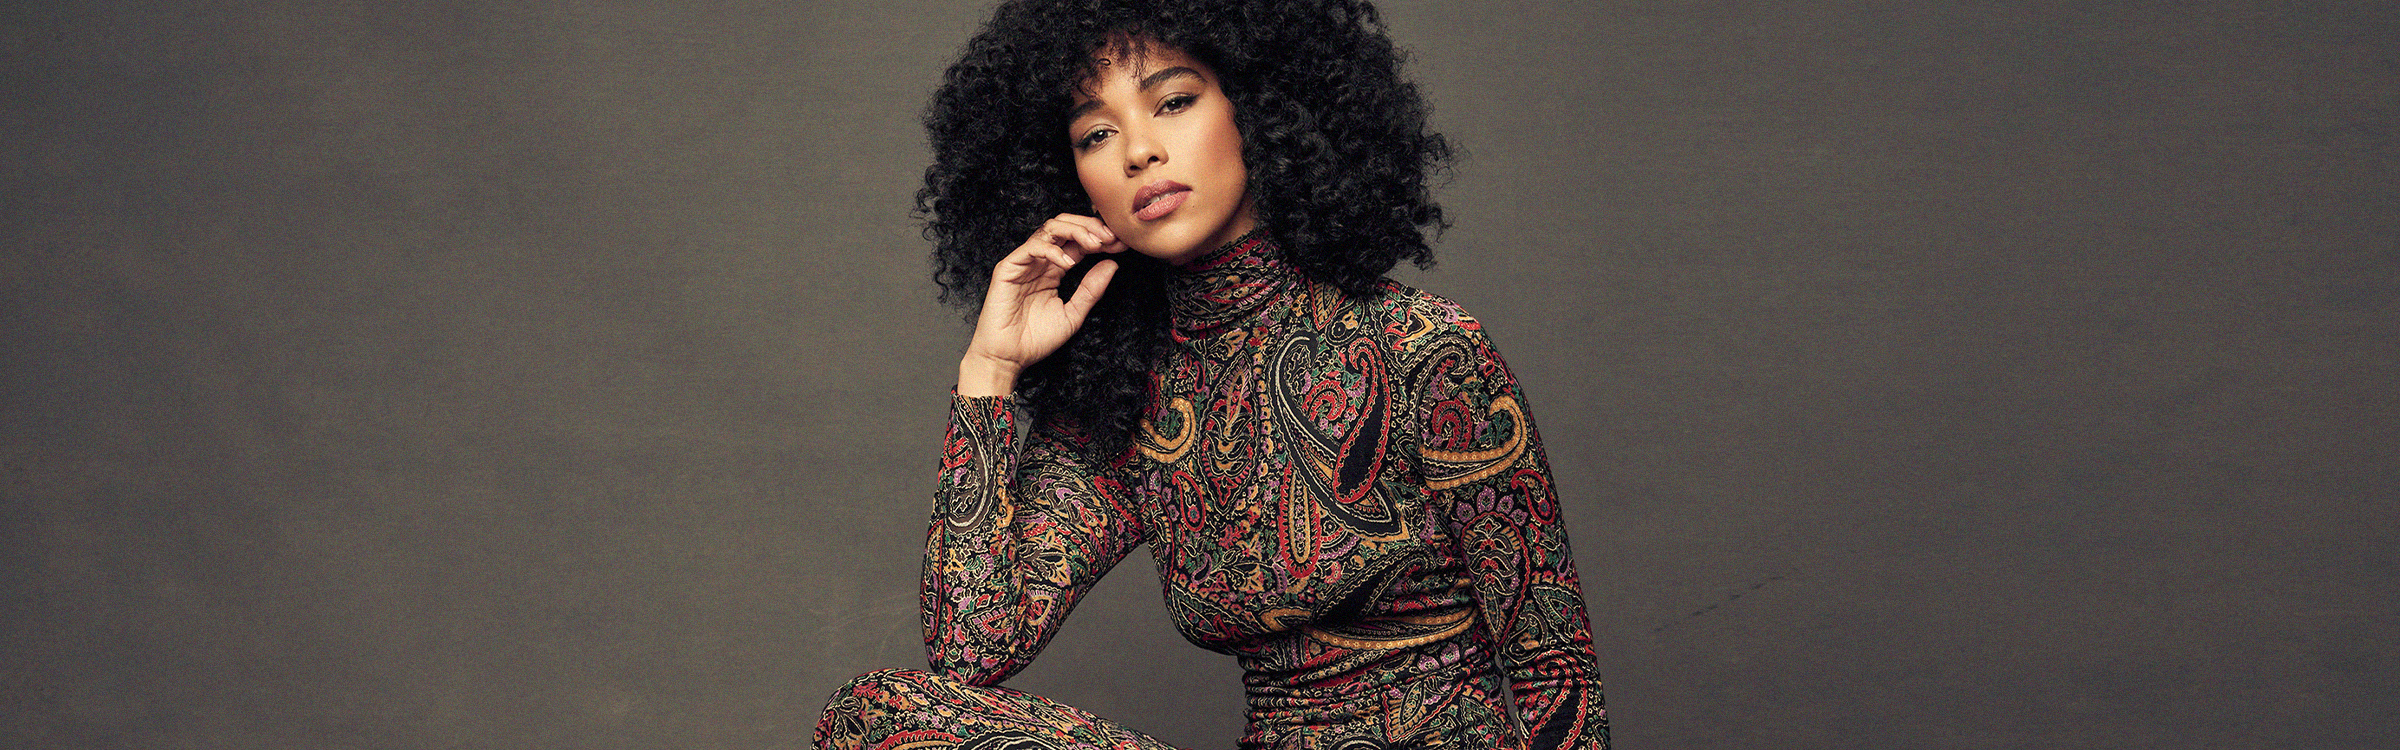 Alexandra Shipp Has Her Eyes on the Prize, Not the Clock